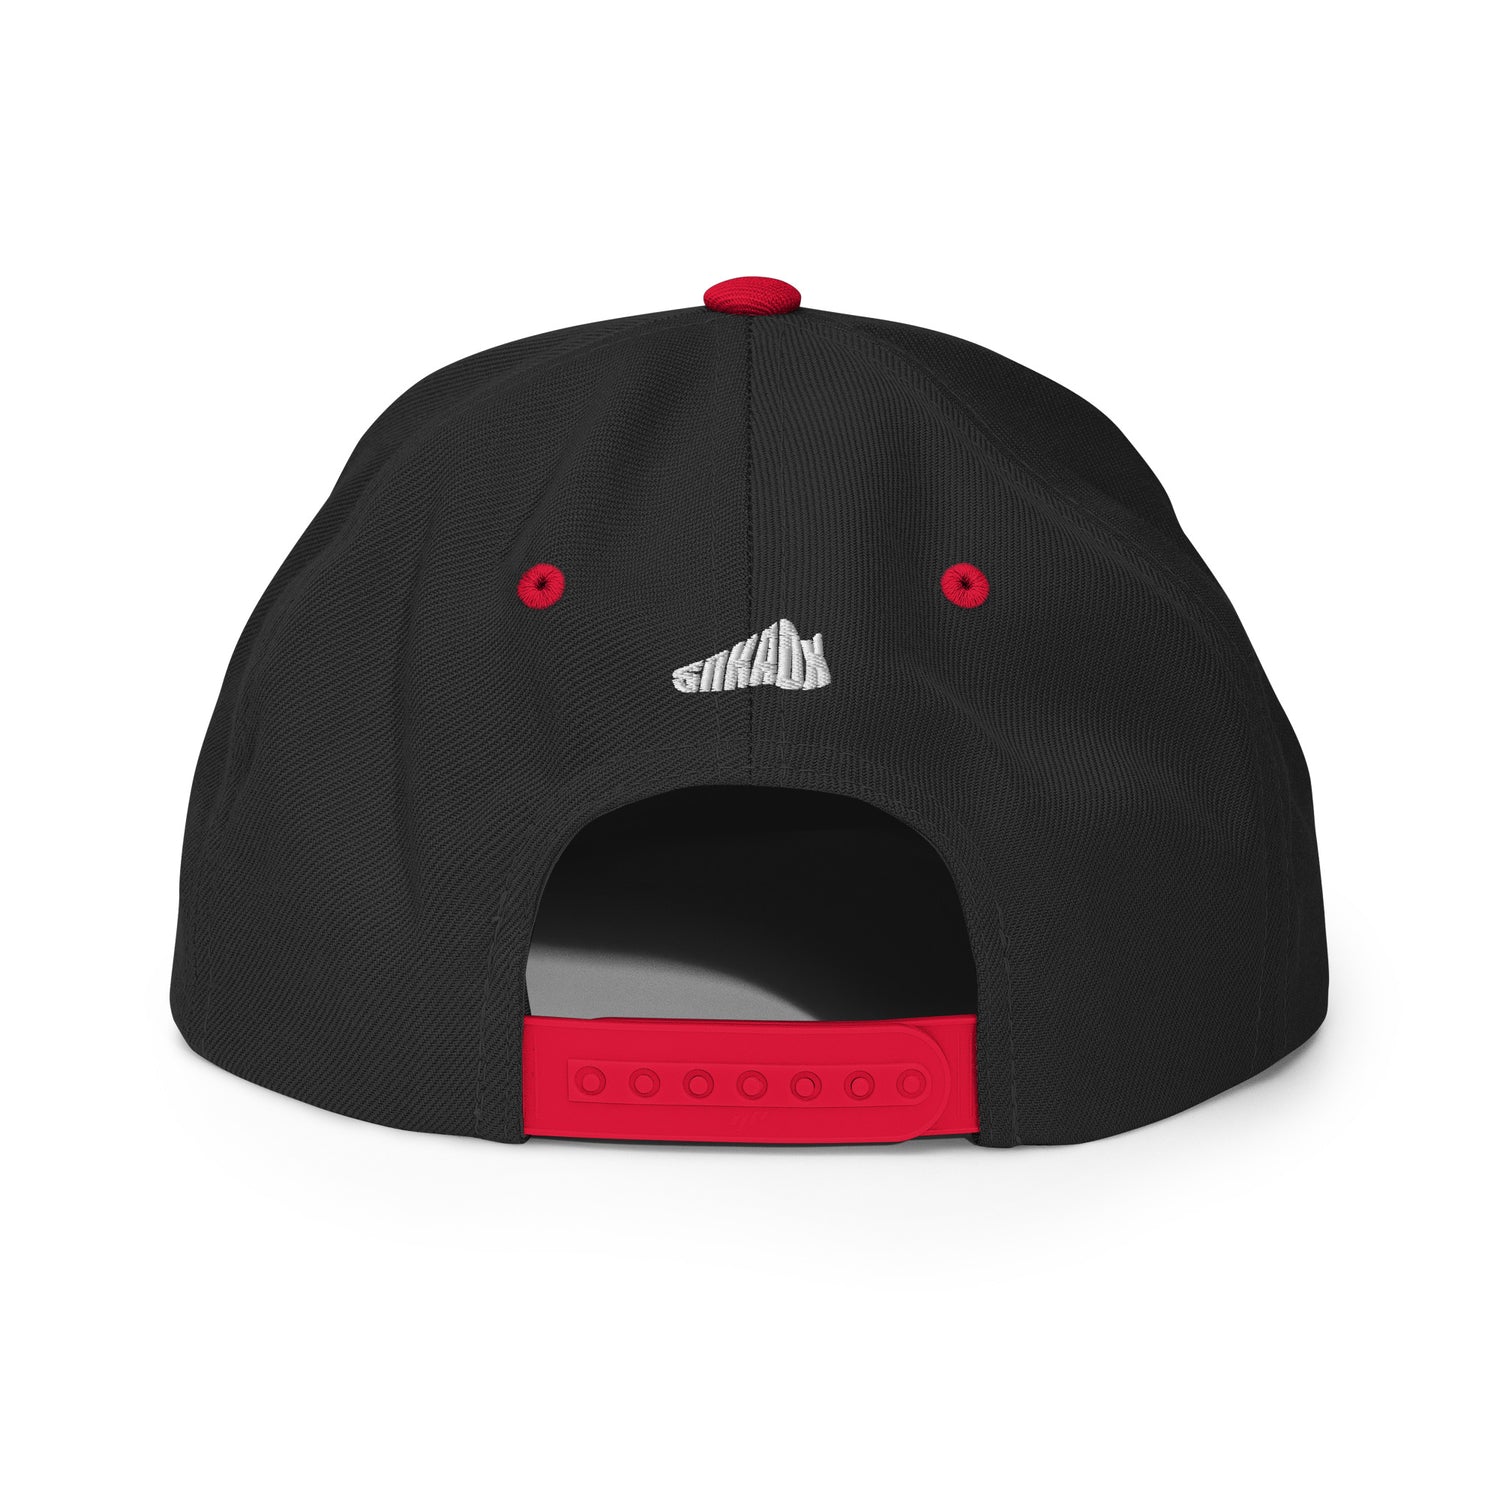 Back view of black and red snapback,